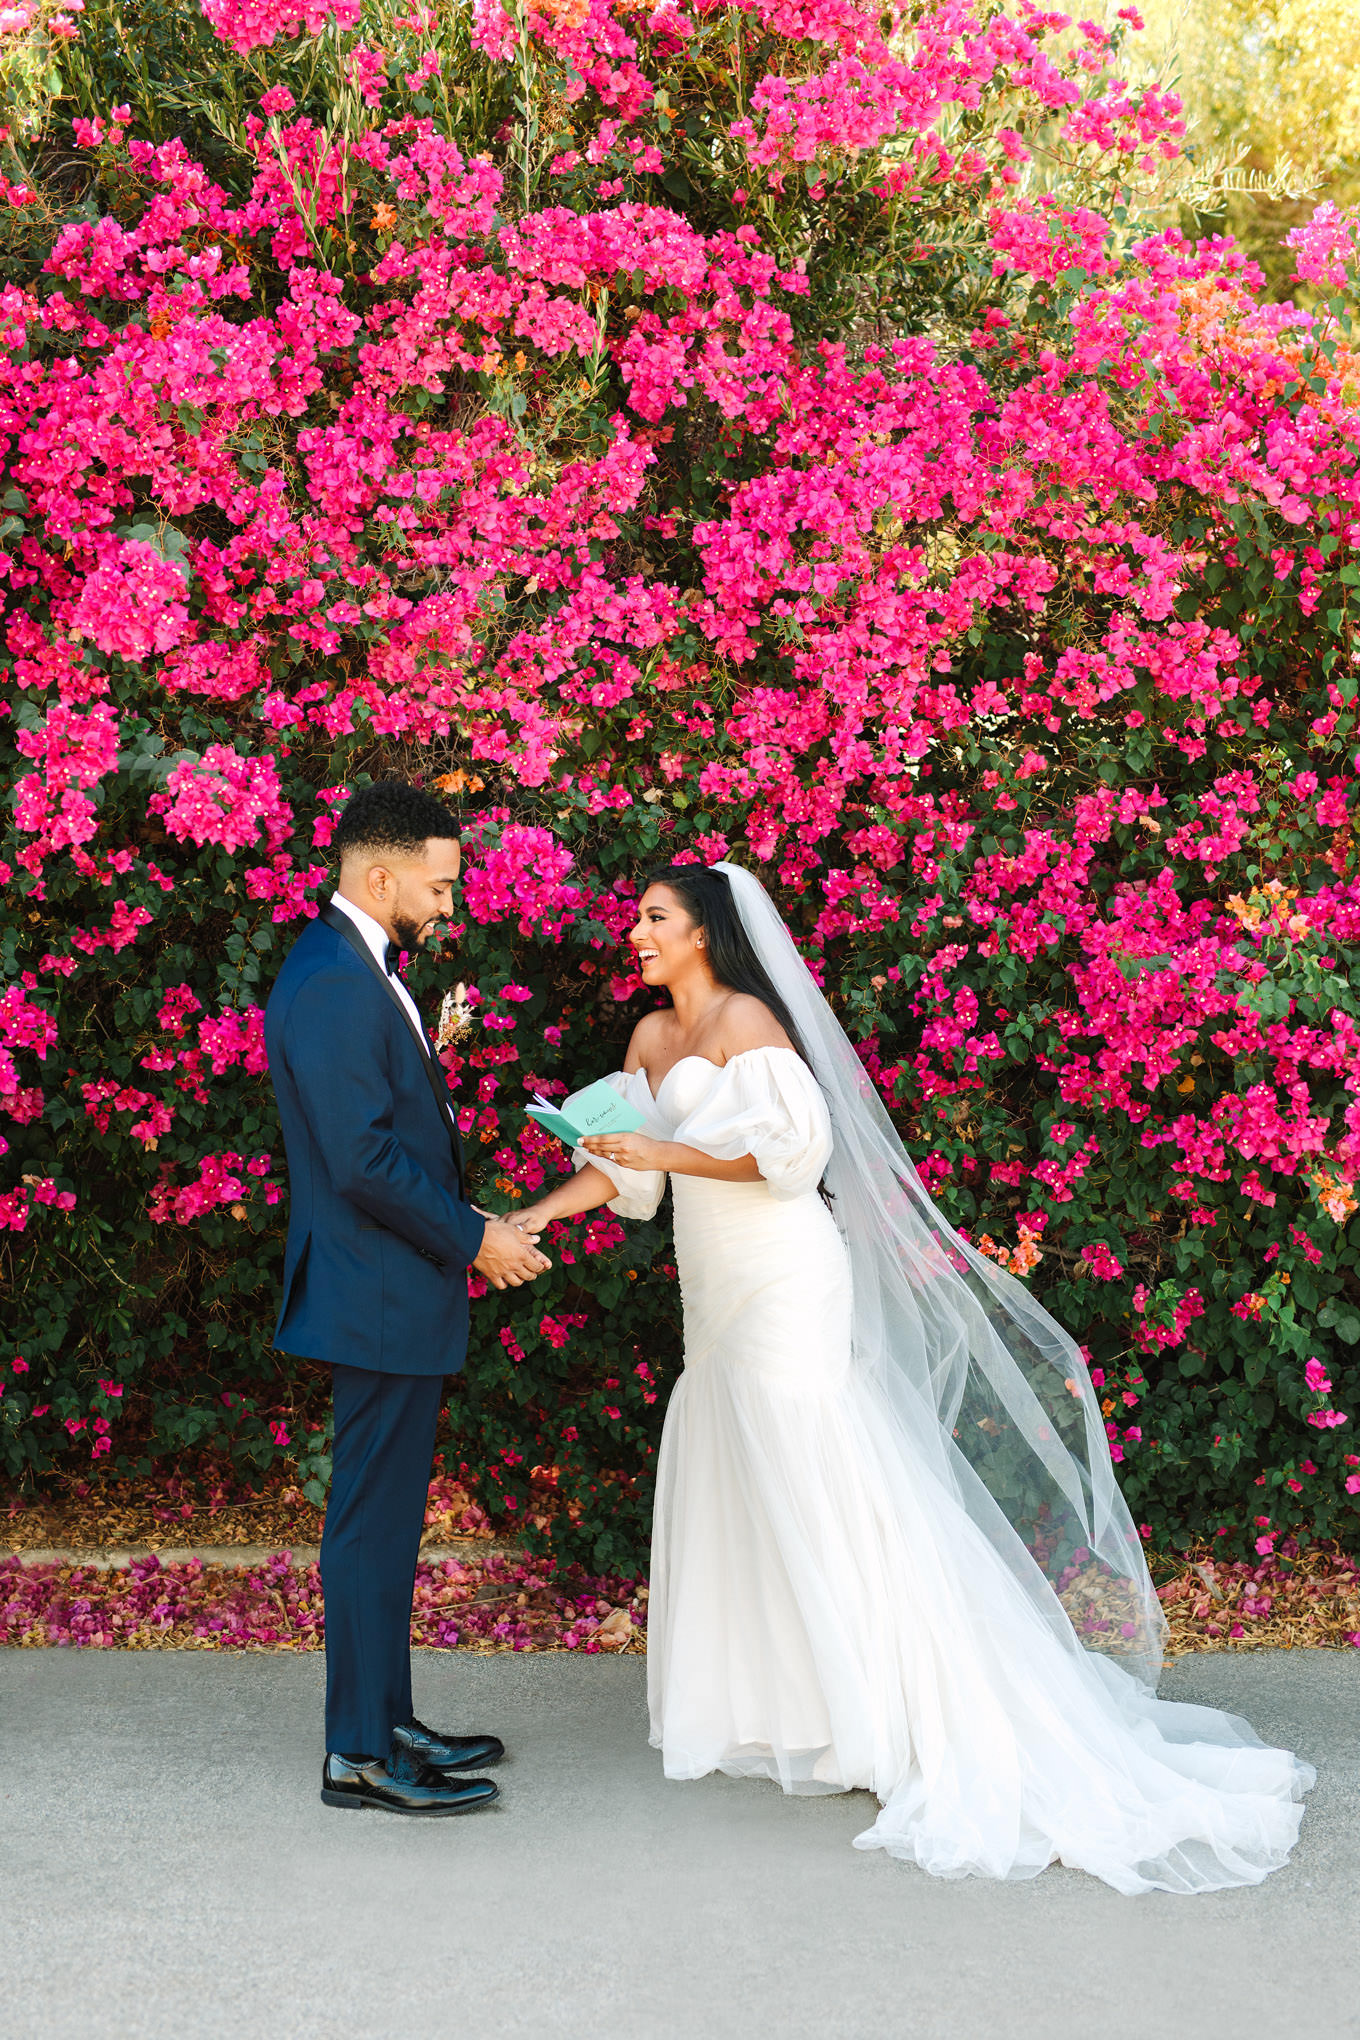 Palm Springs vow exchange in front of bougainvillea | Engagement, elopement, and wedding photography roundup of Mary Costa’s favorite images from 2020 | Colorful and elevated photography for fun-loving couples in Southern California | #2020wedding #elopement #weddingphoto #weddingphotography #microwedding   Source: Mary Costa Photography | Los Angeles